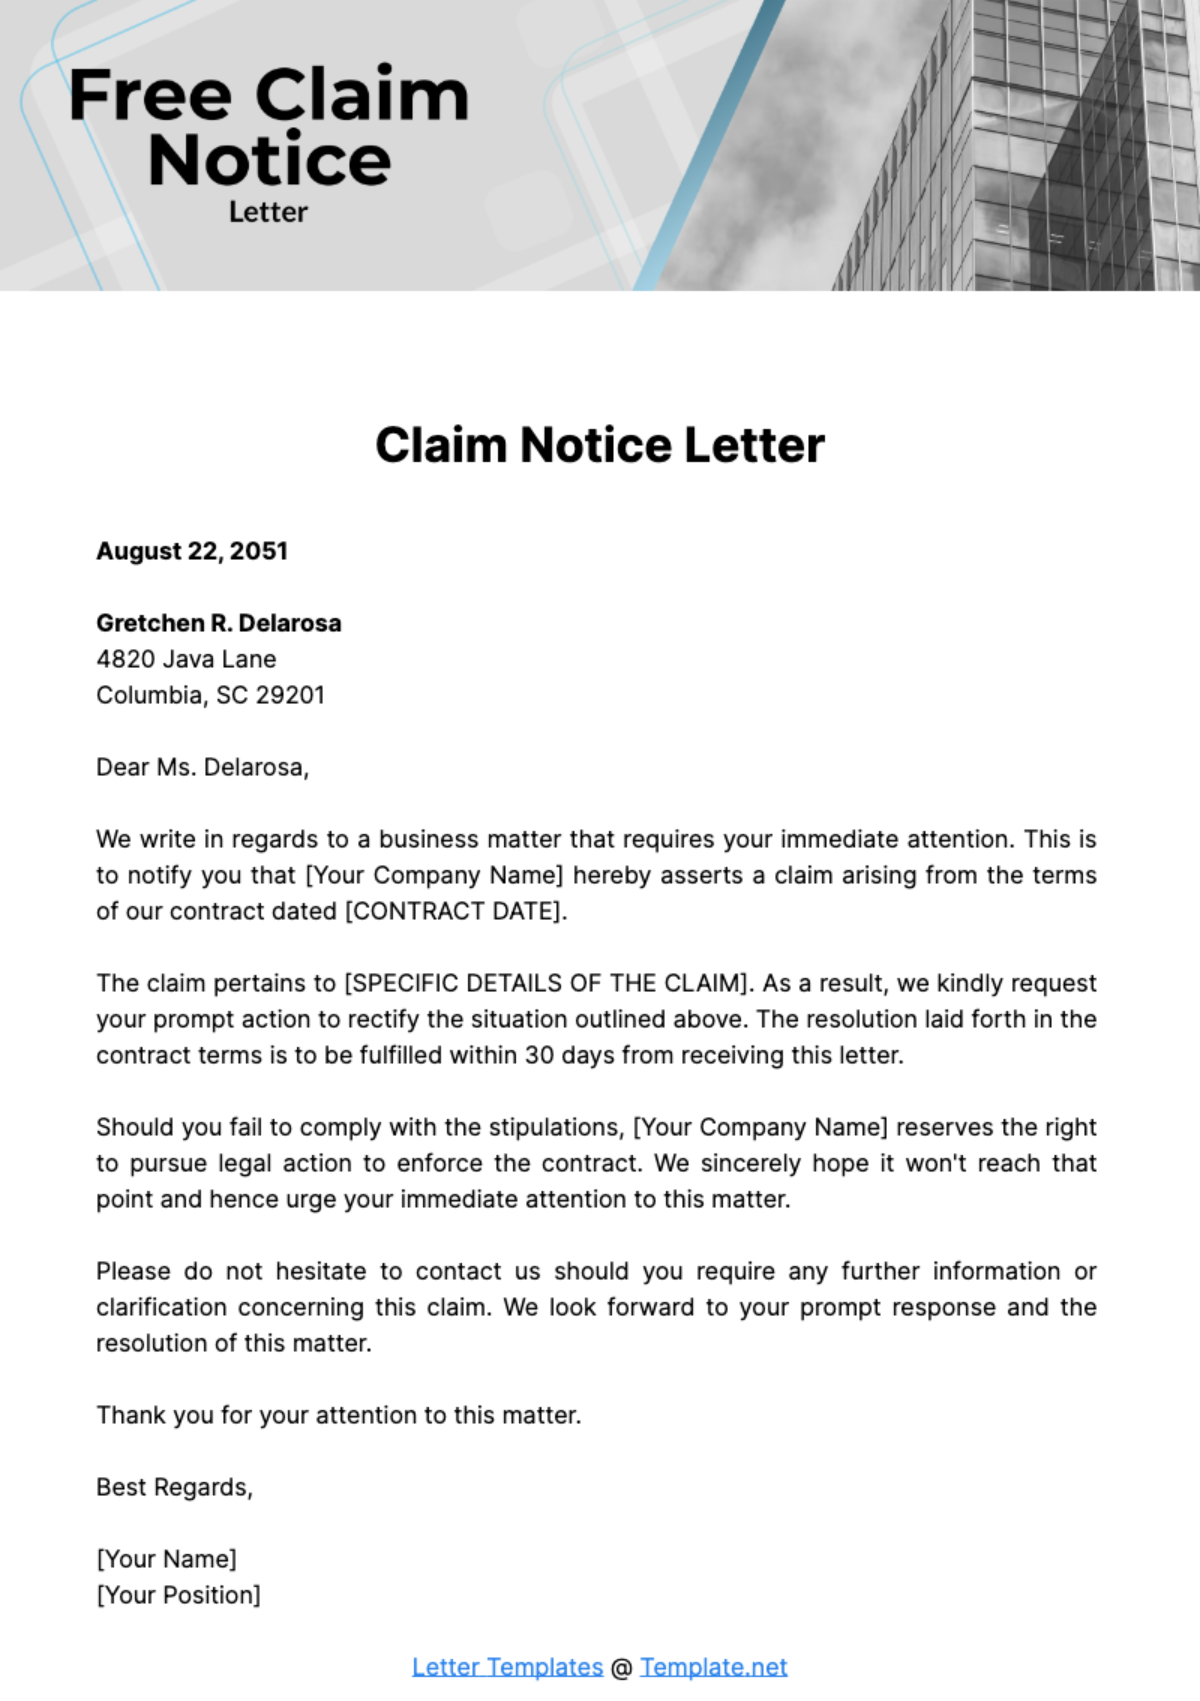 Free Claim Notice Letter Template